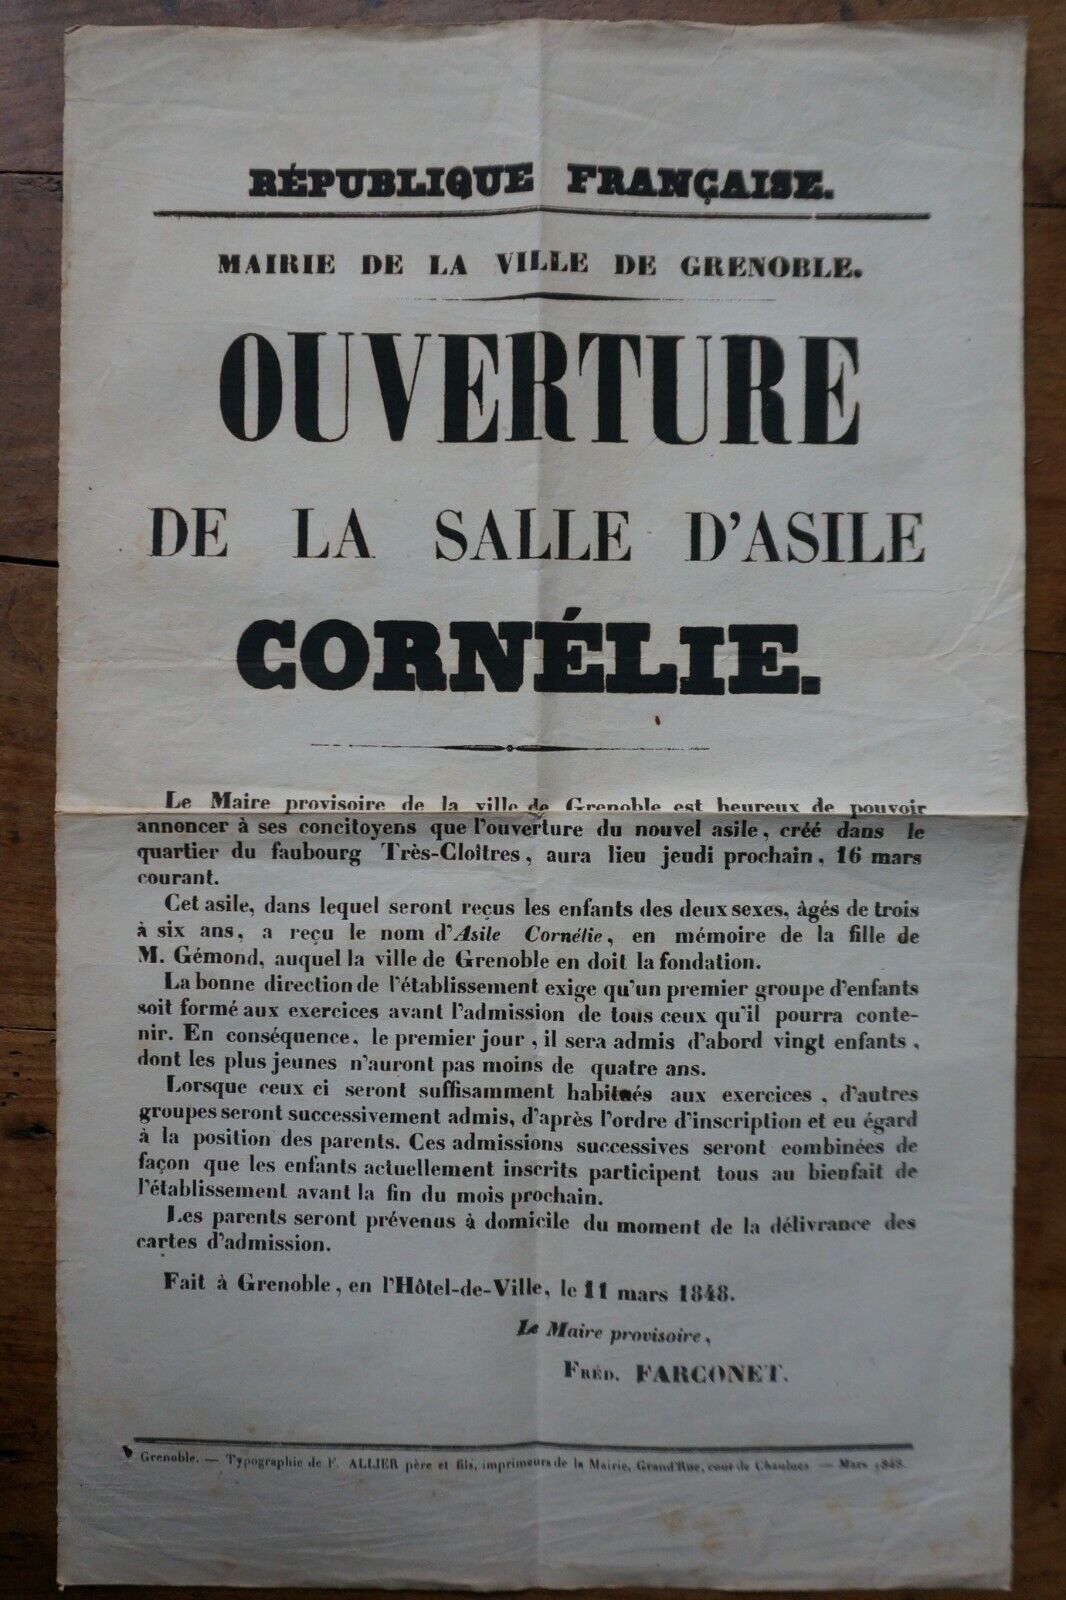 MUNICIPAL POSTER - CITY OF GRENOBLE - MARCH 11, 1848 - PUBLIC INFORMATION